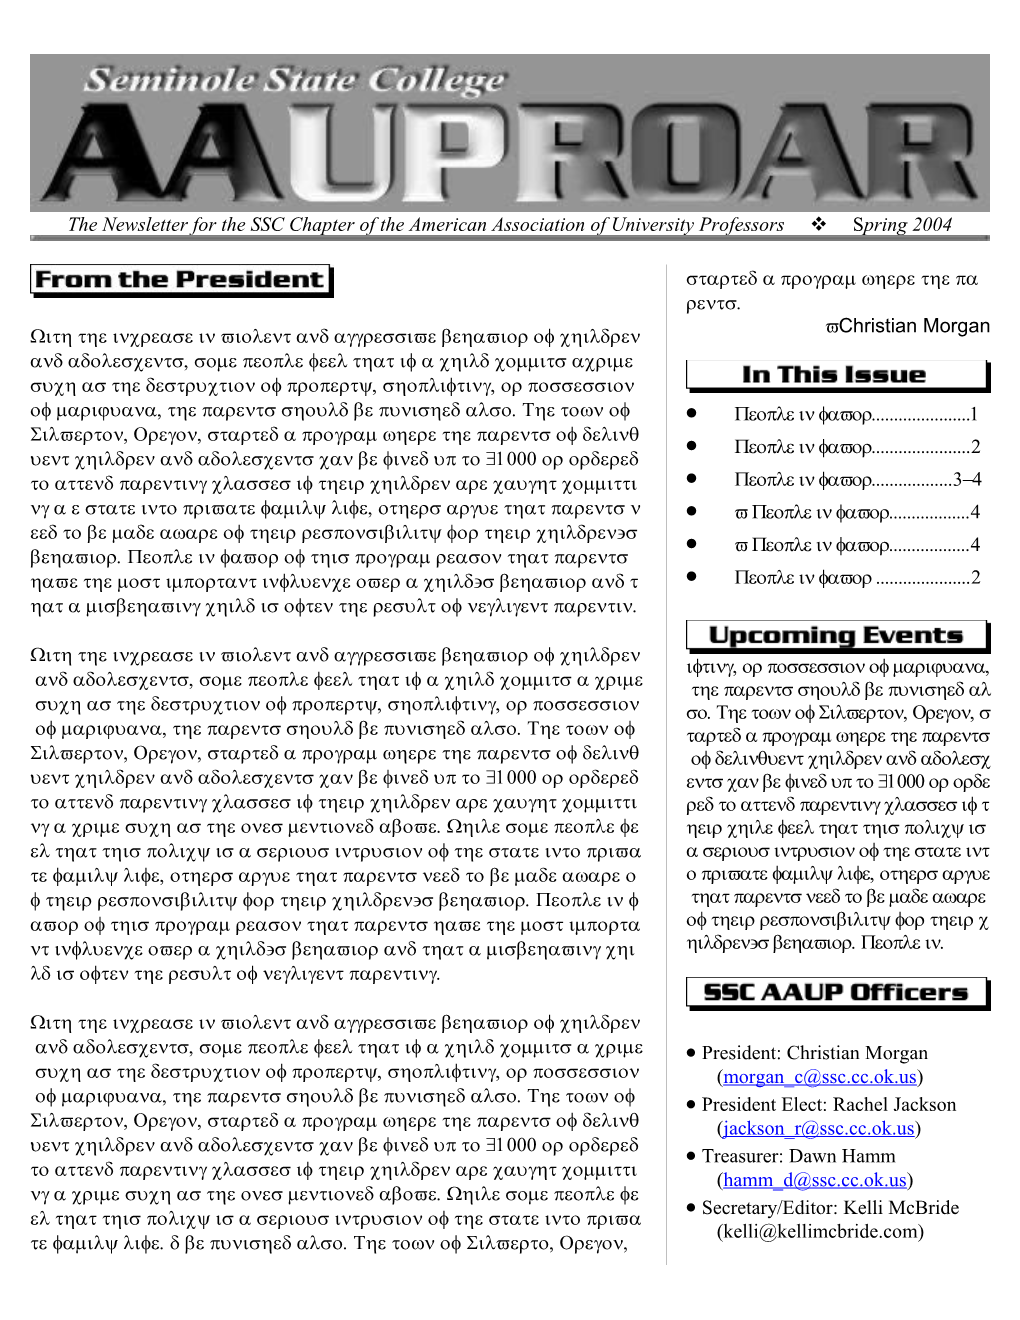 The Newsletter for the SSC Chapter of the American Association of University Professors